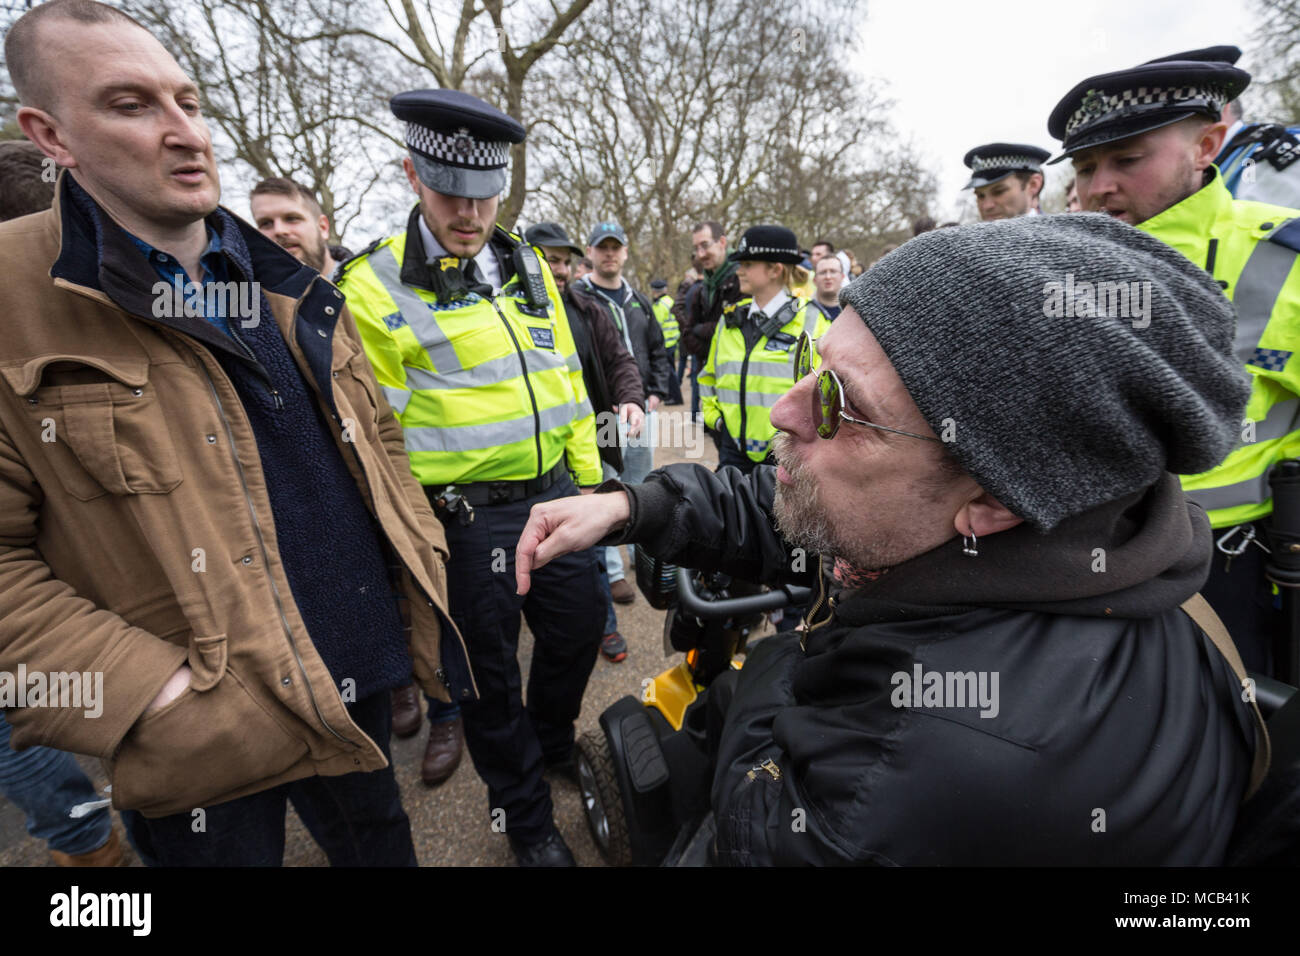 London, UK. 15th April, 2018. Confrontations between nationalist members (L) and opposing anti-fascist activists (R) in Hyde Park as members of the right-wing Generation Identity movement wait to hear a speech by a representative from the German women’s 120dB movement. Credit: Guy Corbishley/Alamy Live News Stock Photo